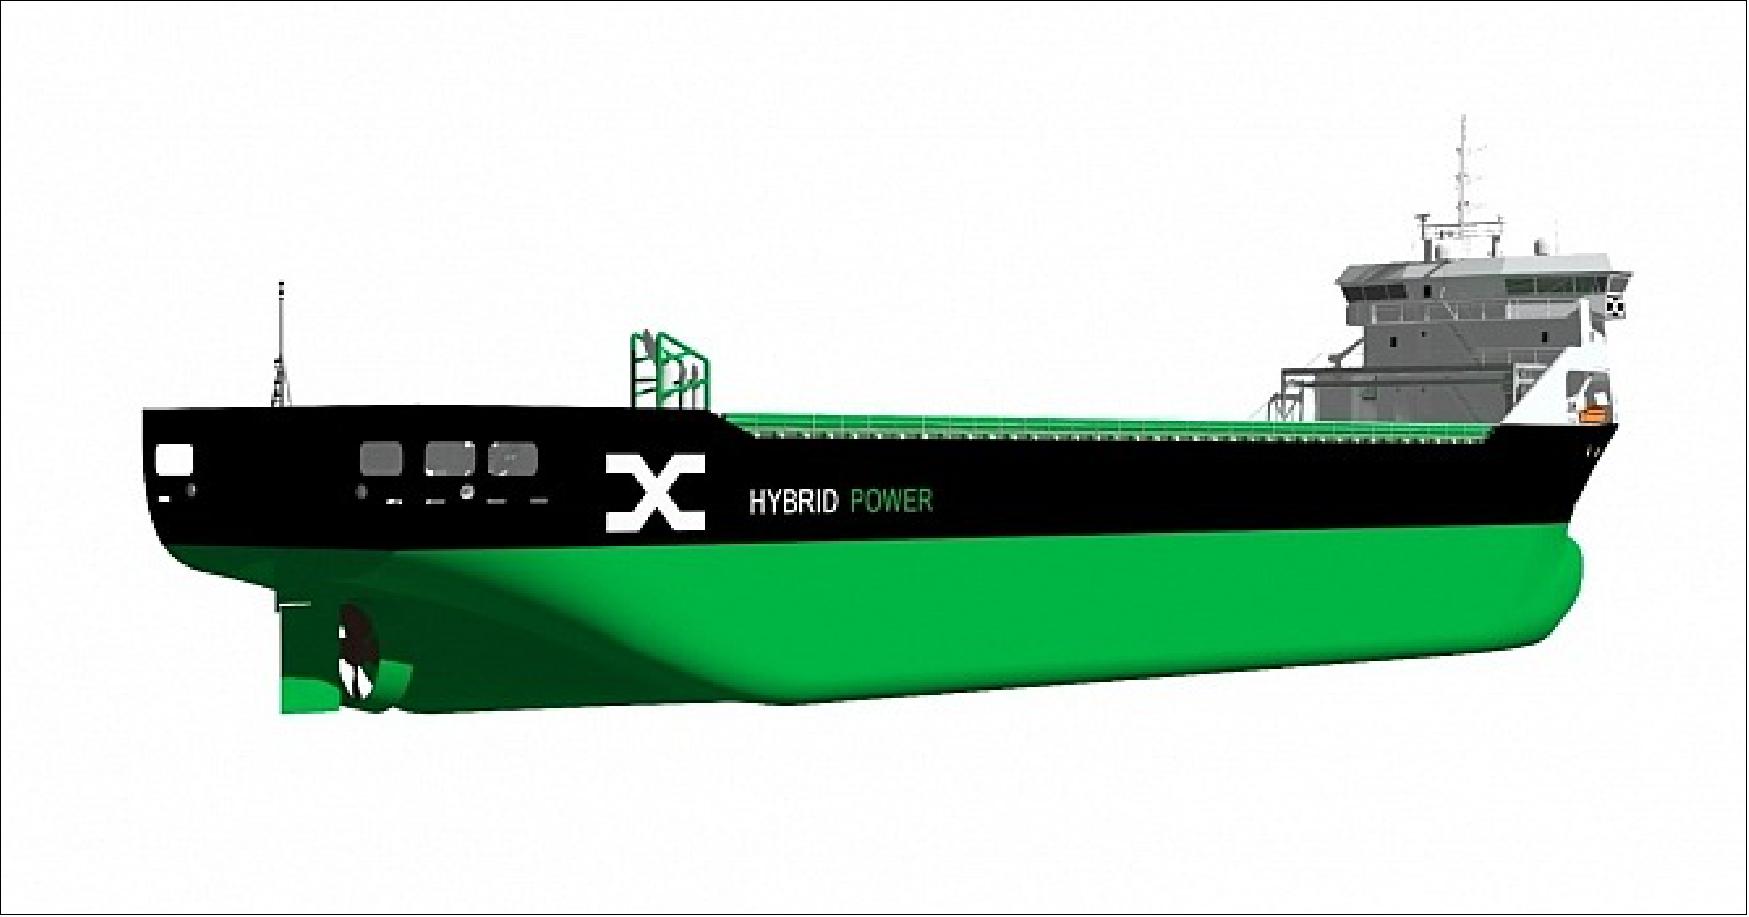 Figure 88: The vessels will use batteries, shore-side electricity solutions and electric hybrid solutions to enable completely emission-free and noise-free port calls, being able to arrive and leave port with electric power alone (image credit: VPO Global)